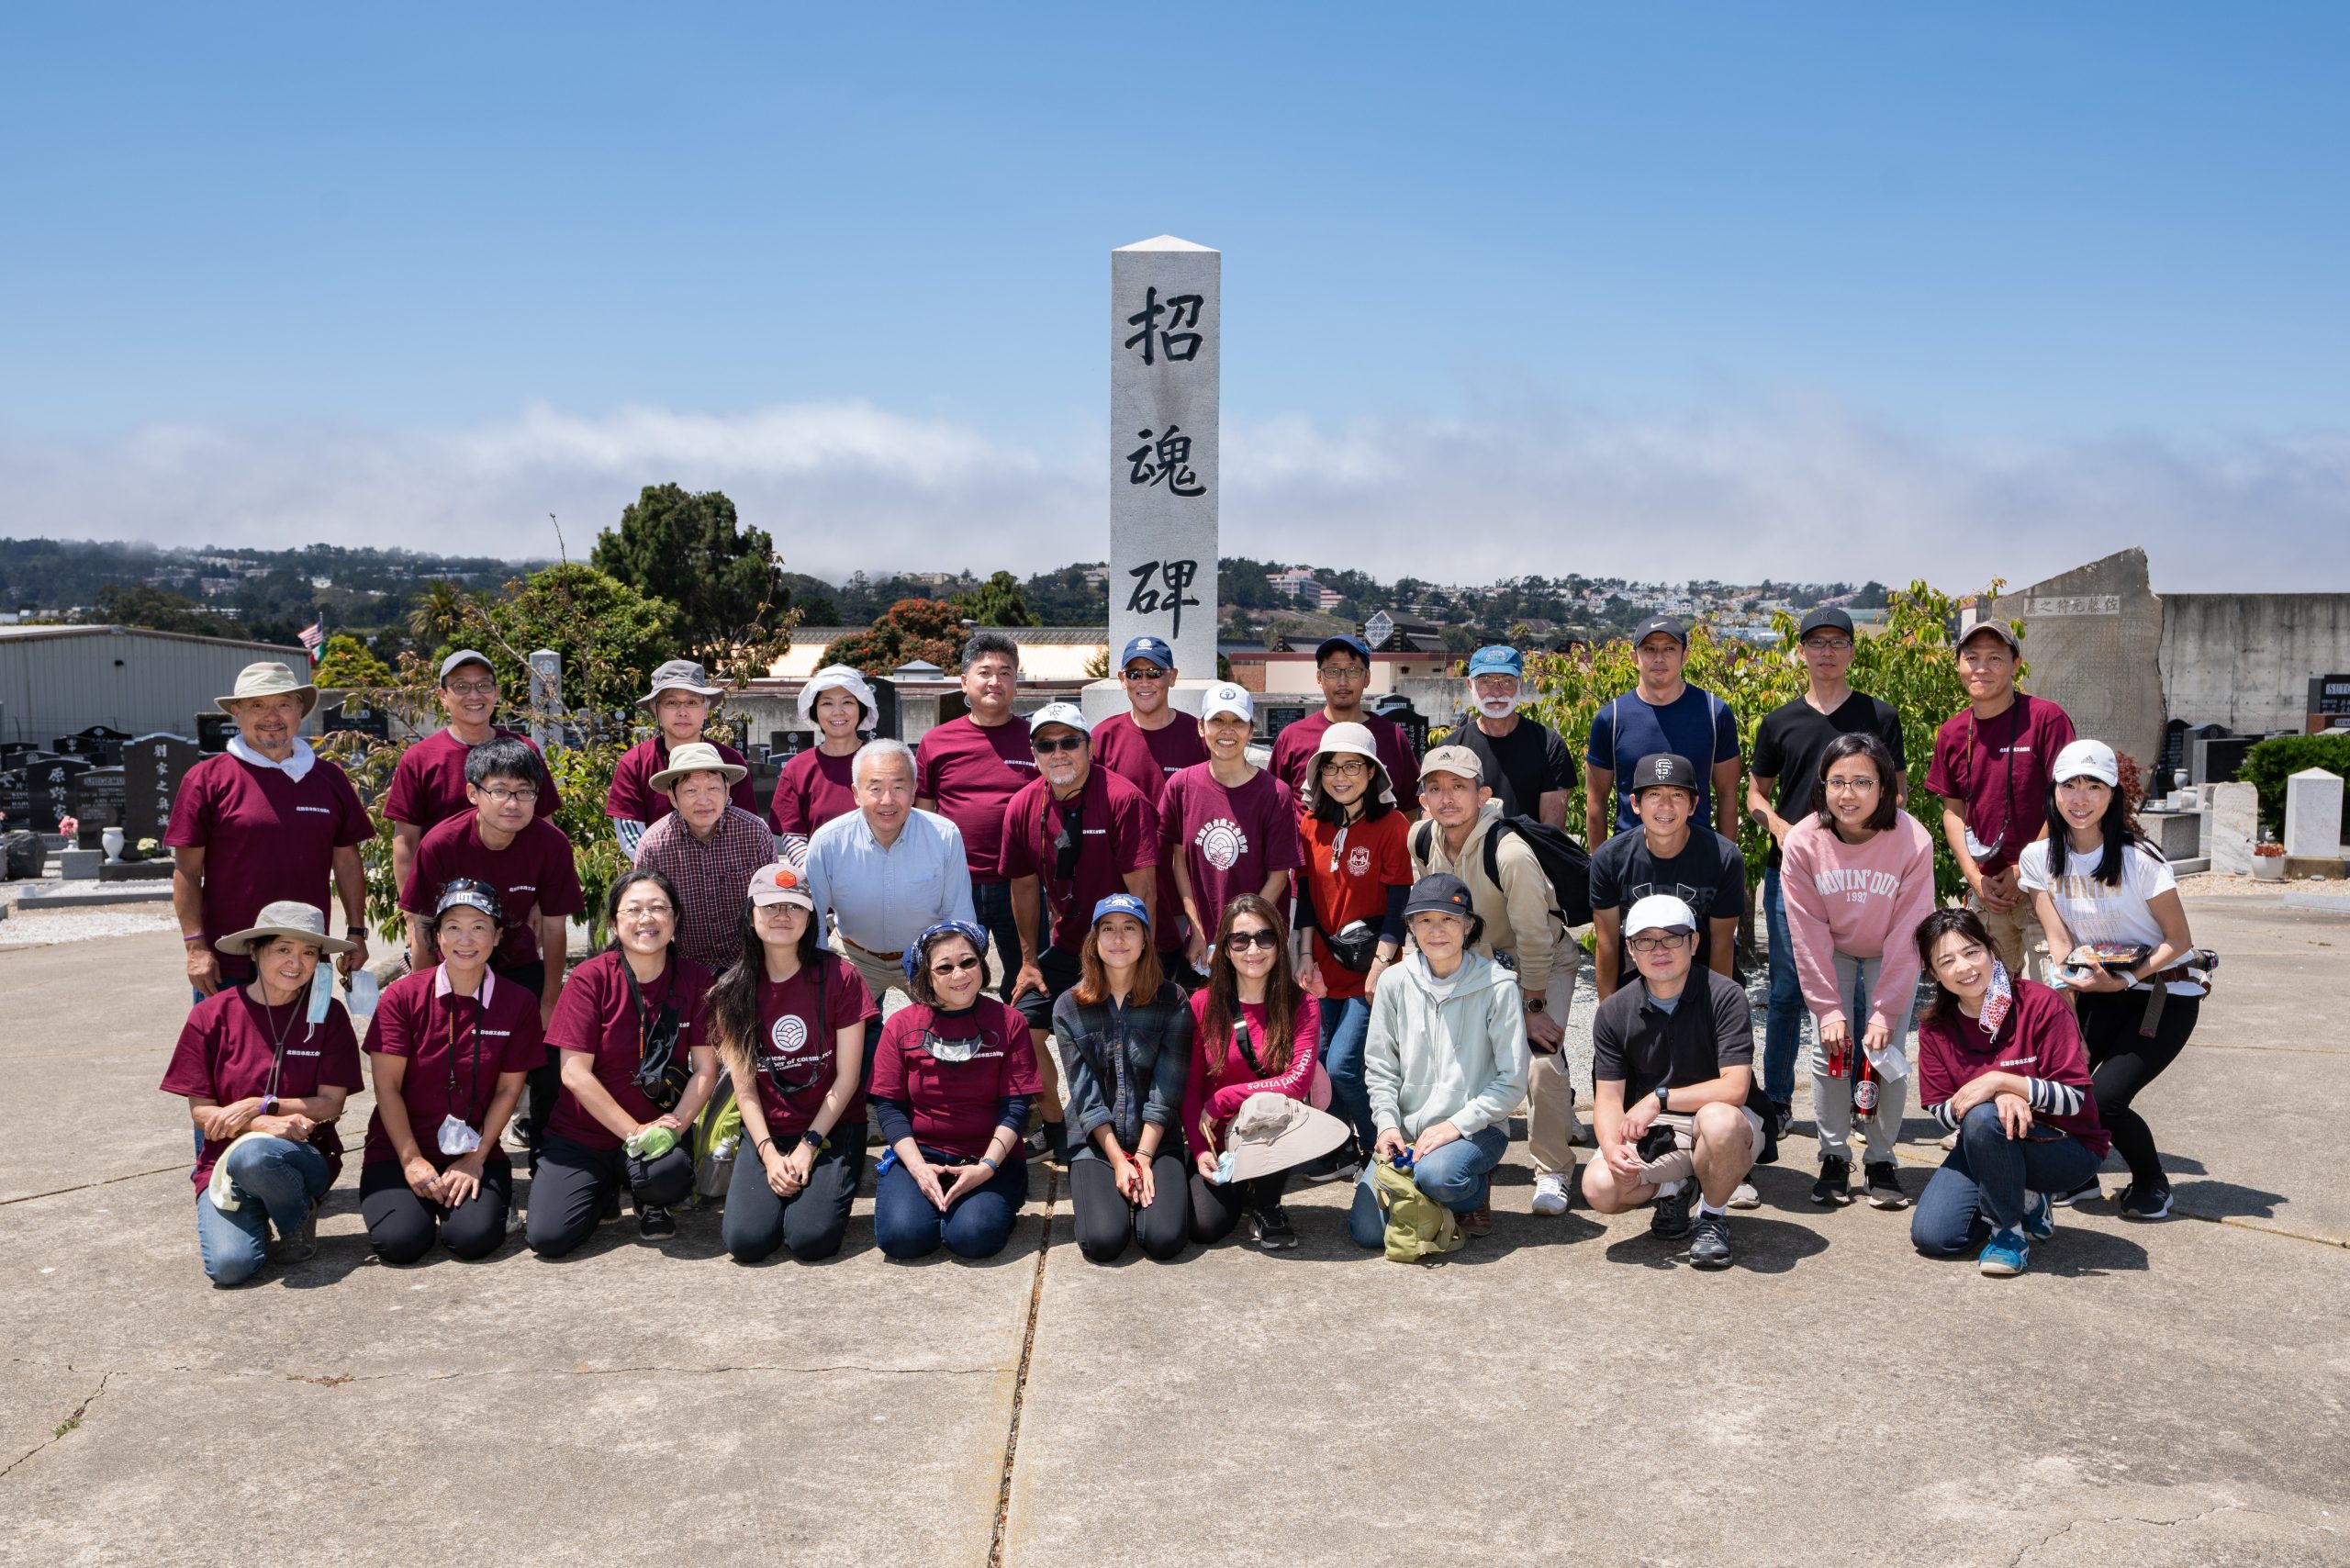 Annual clean-up of the Japanese Cemetery in Colma.